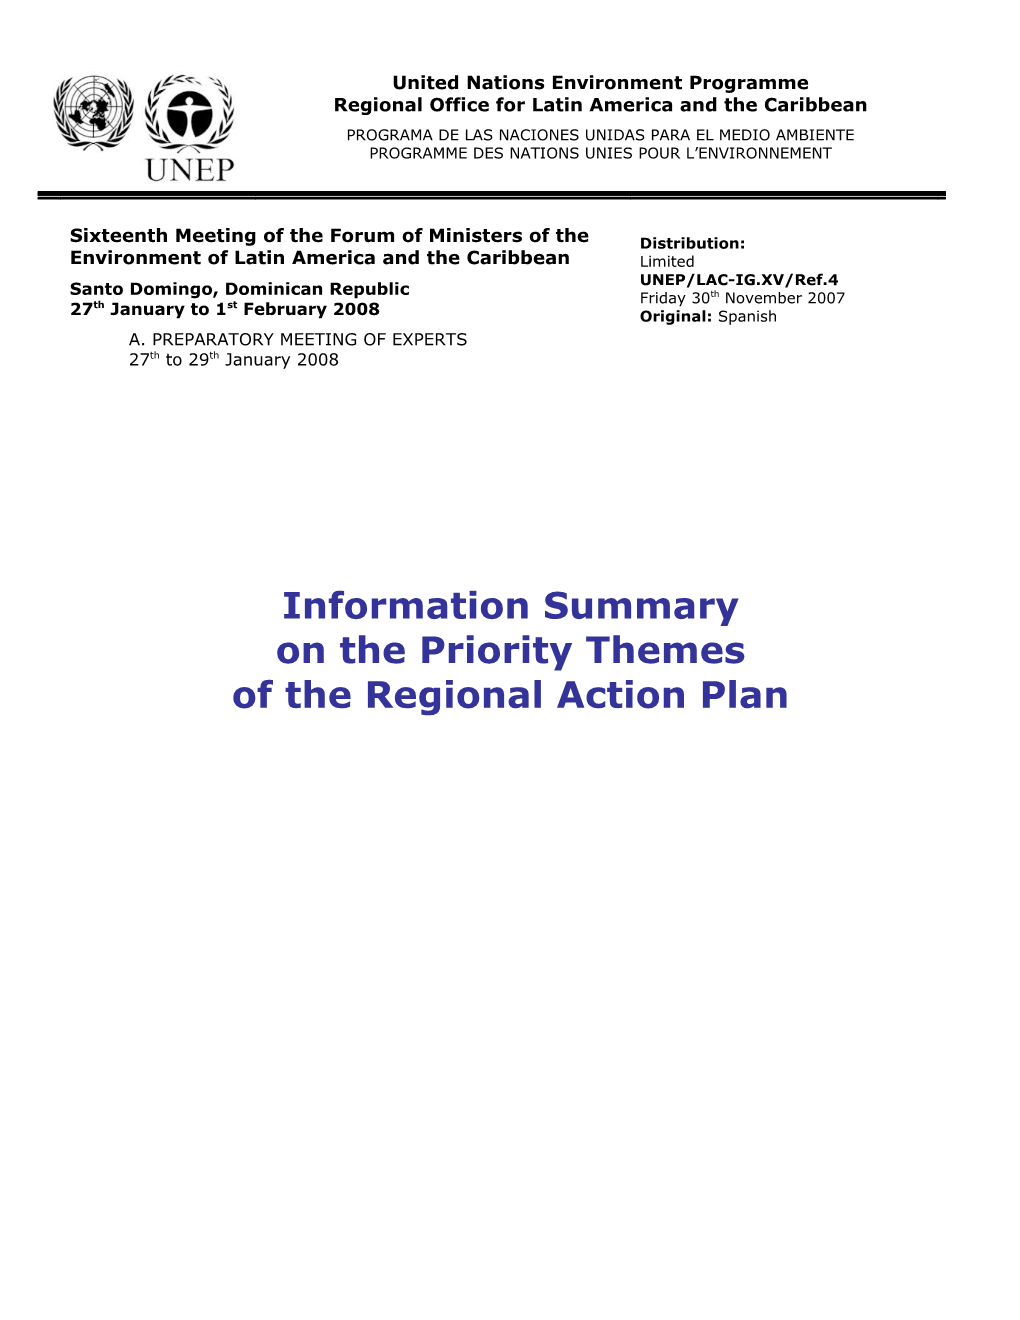 Information Summary on the Priority Themes of the Regional Action Plan